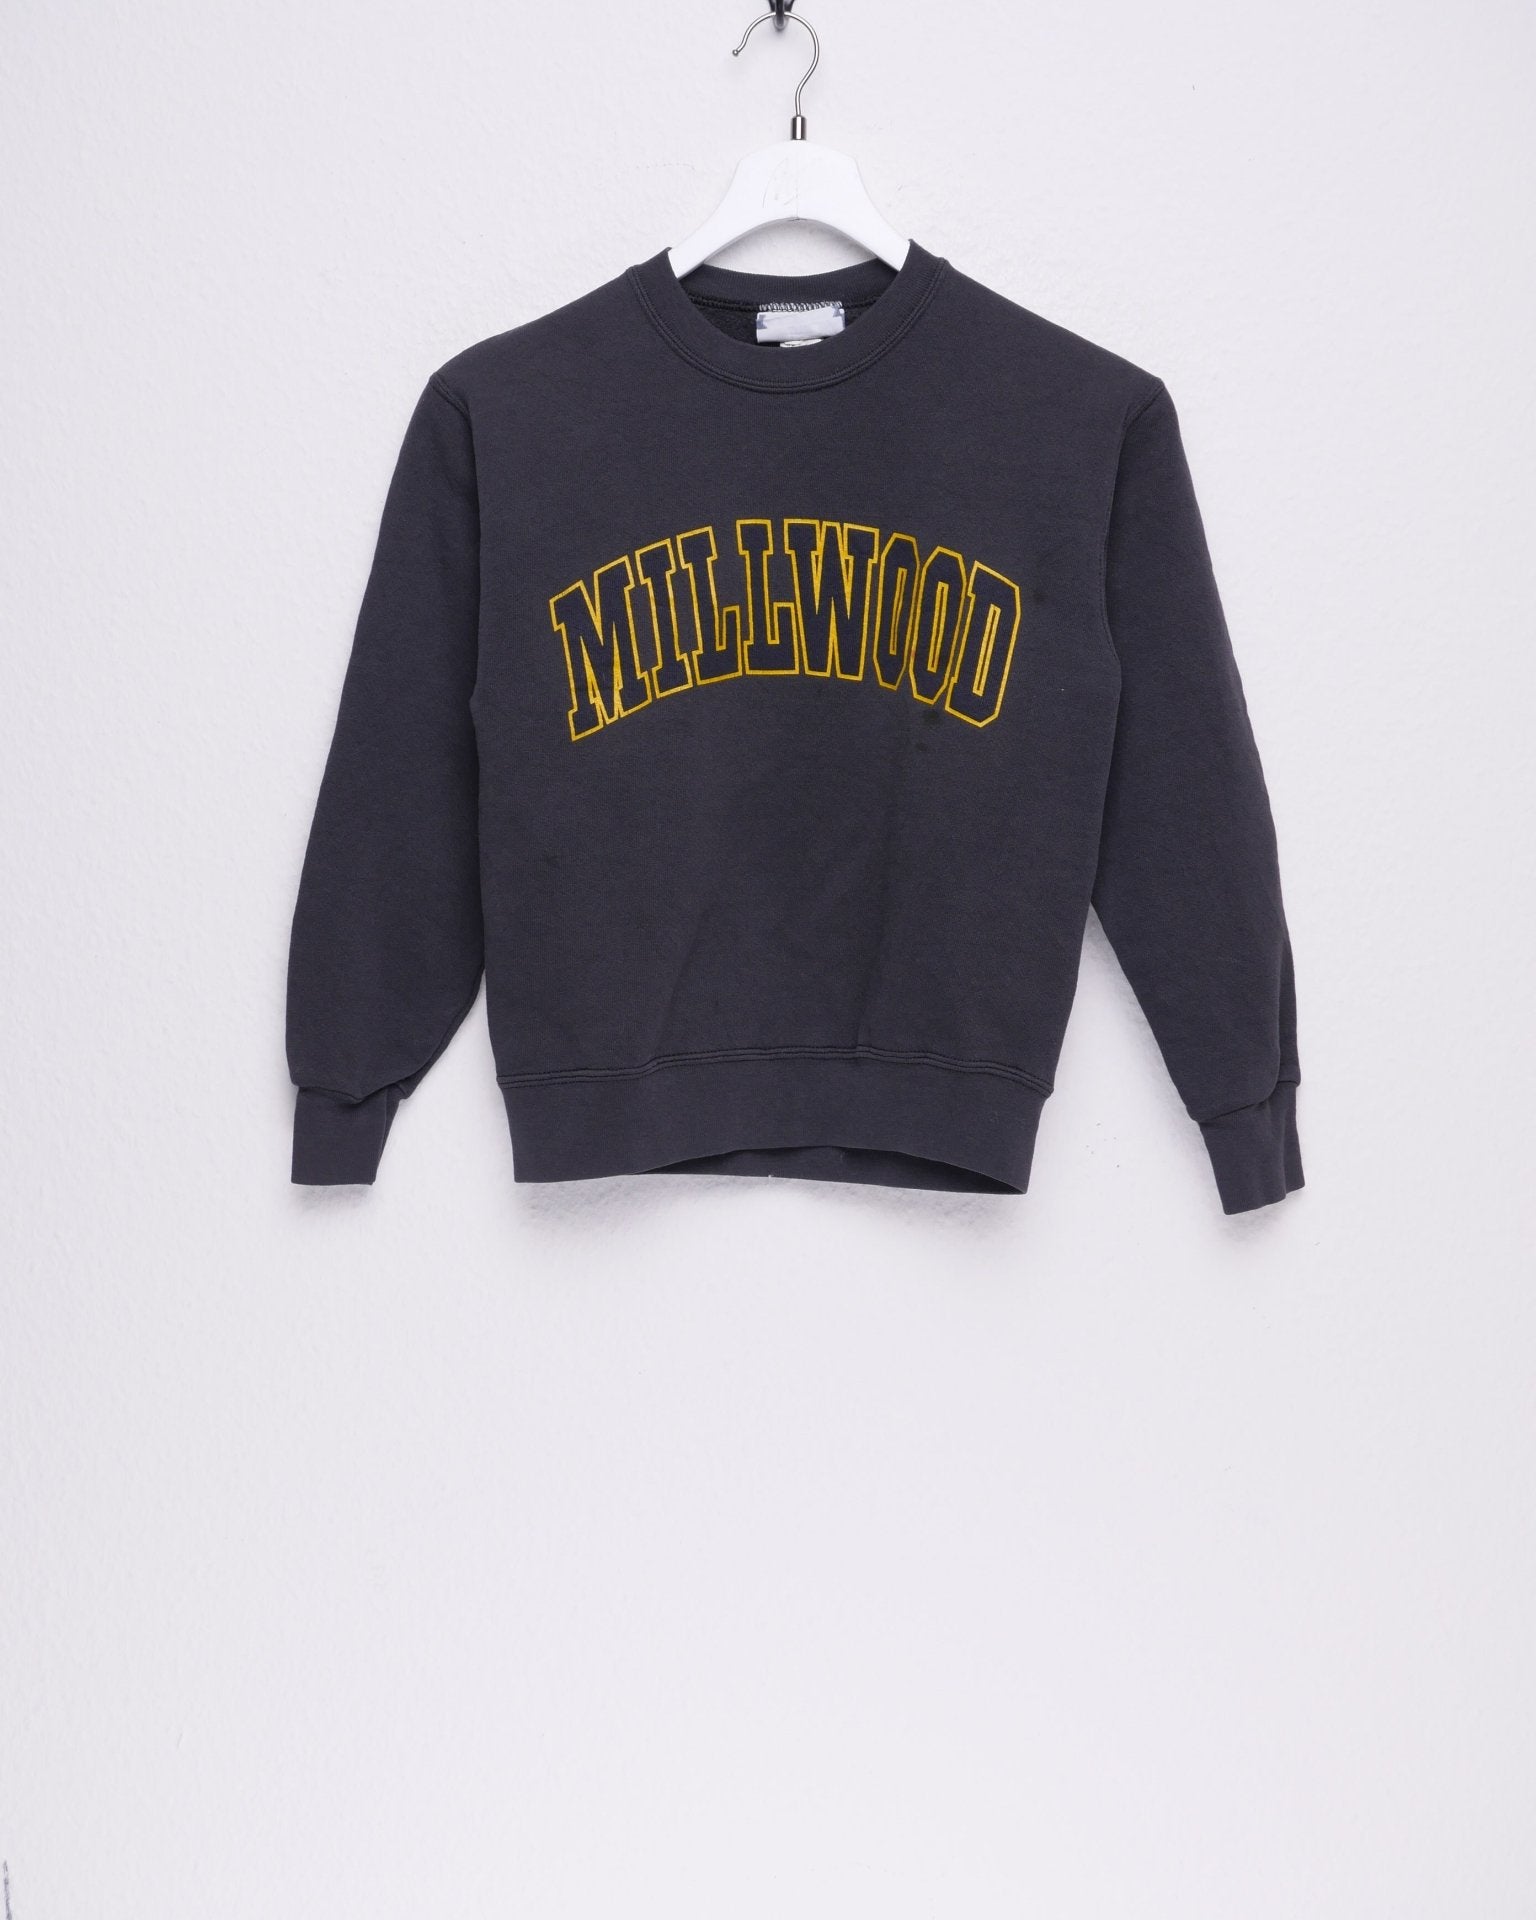 Lee 'Millwood' printed Spellout Sweater - Peeces